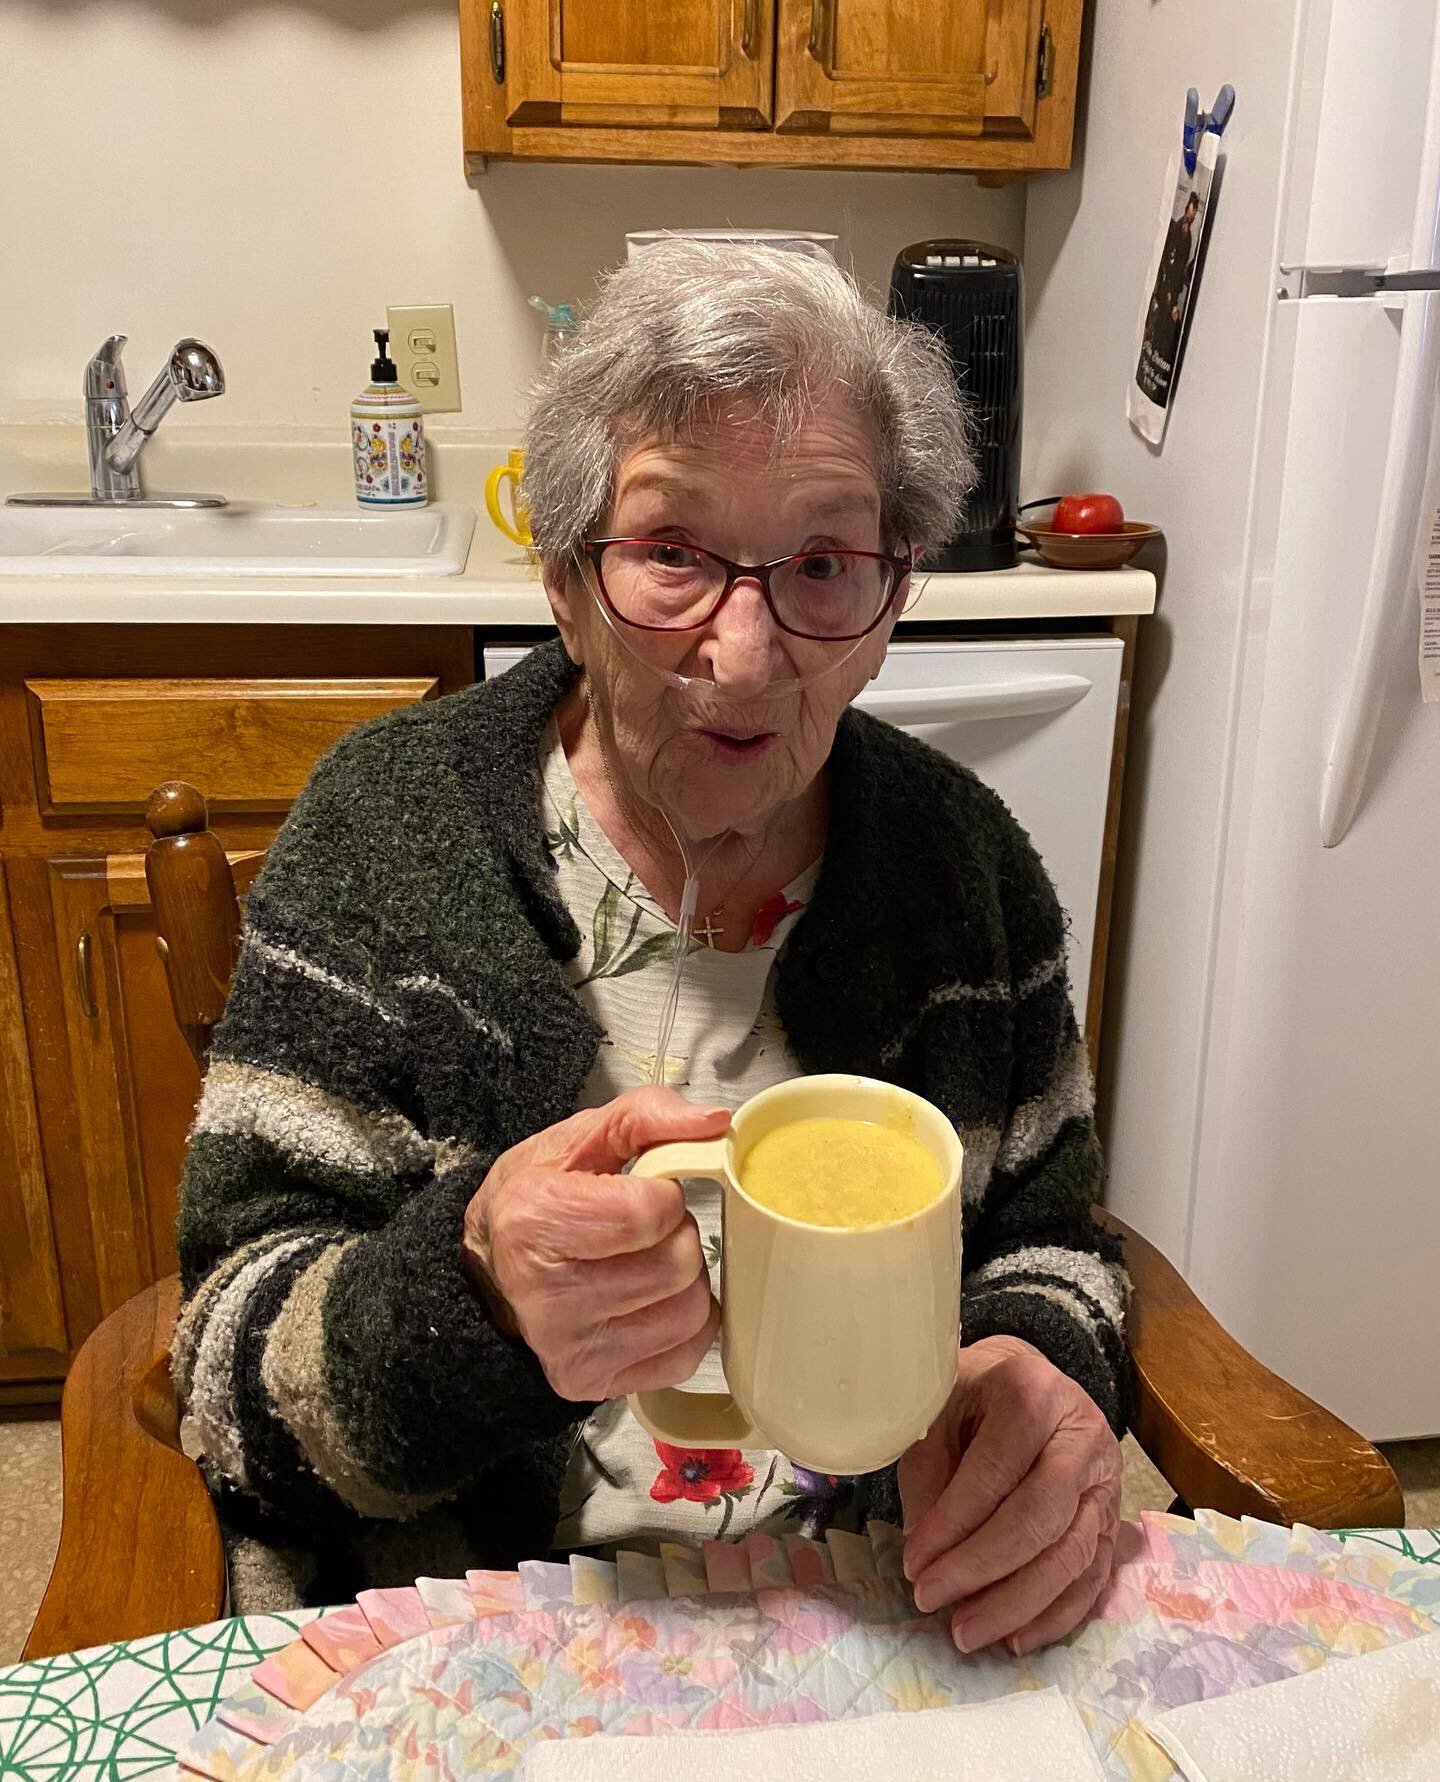 No beer tonight for this cutie, but she loves to drink her soup!! She&rsquo;s still plugging along ❤️